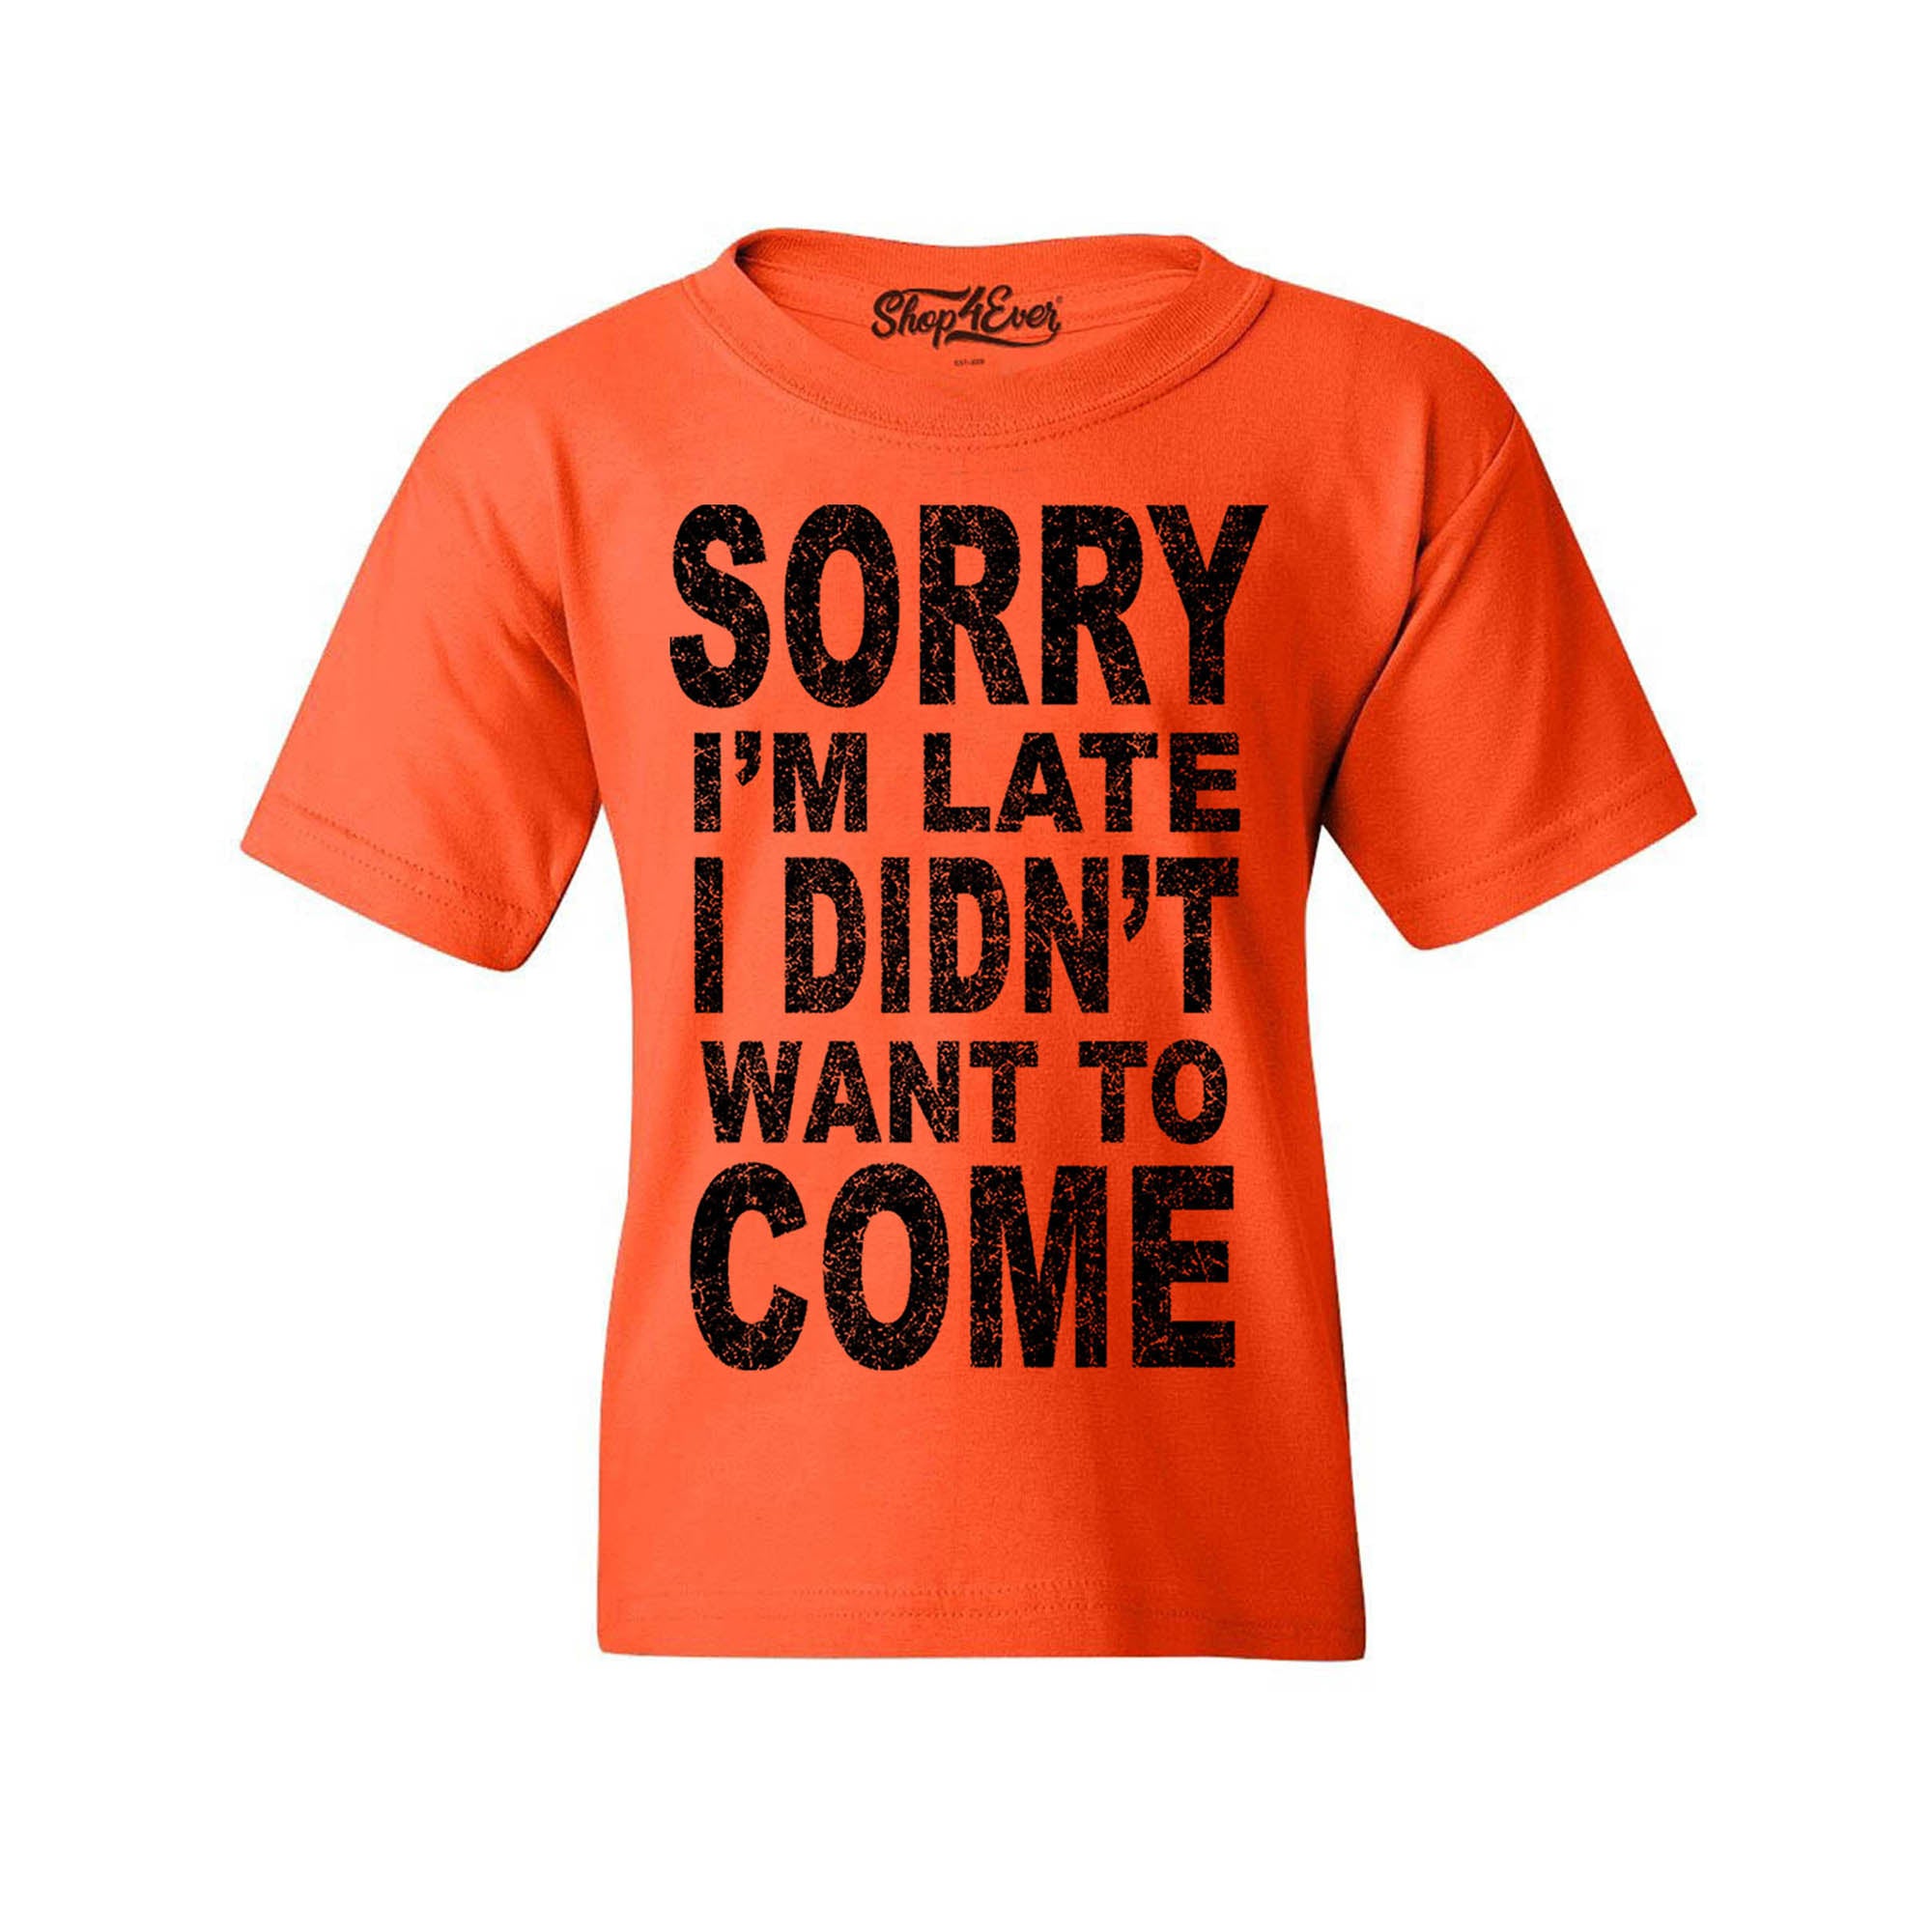 Sorry I'm Late I Didn't Want to Come Black Youth's T-Shirt Sayings Shirts